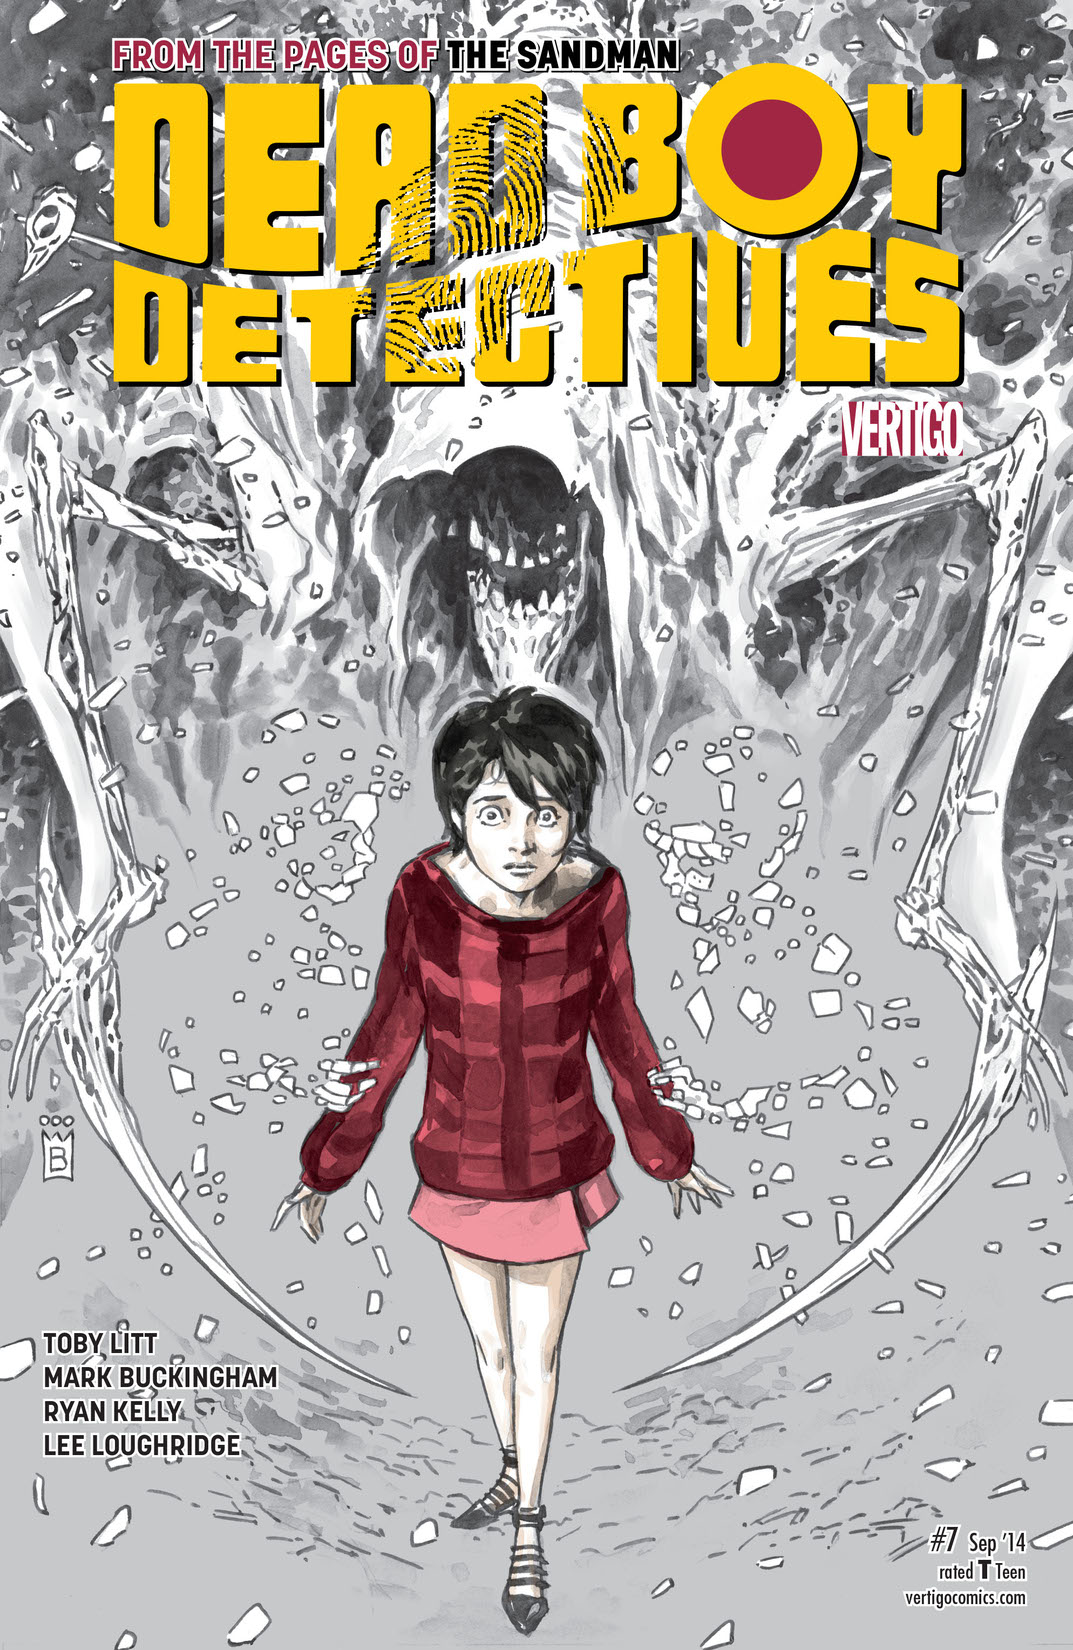 The Dead Boy Detectives #7 preview images